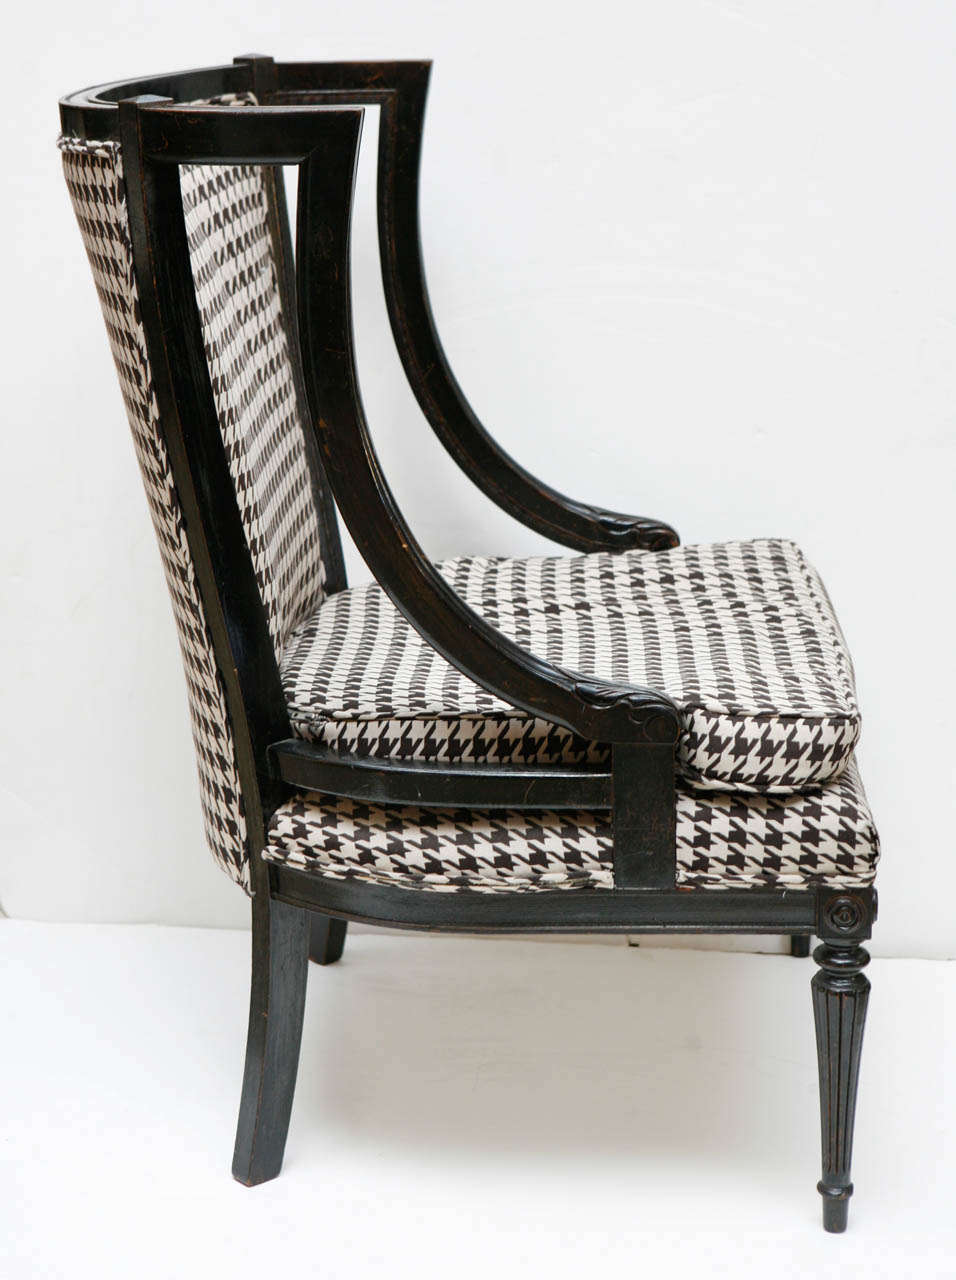 Wood Pair of Houndstooth Chairs